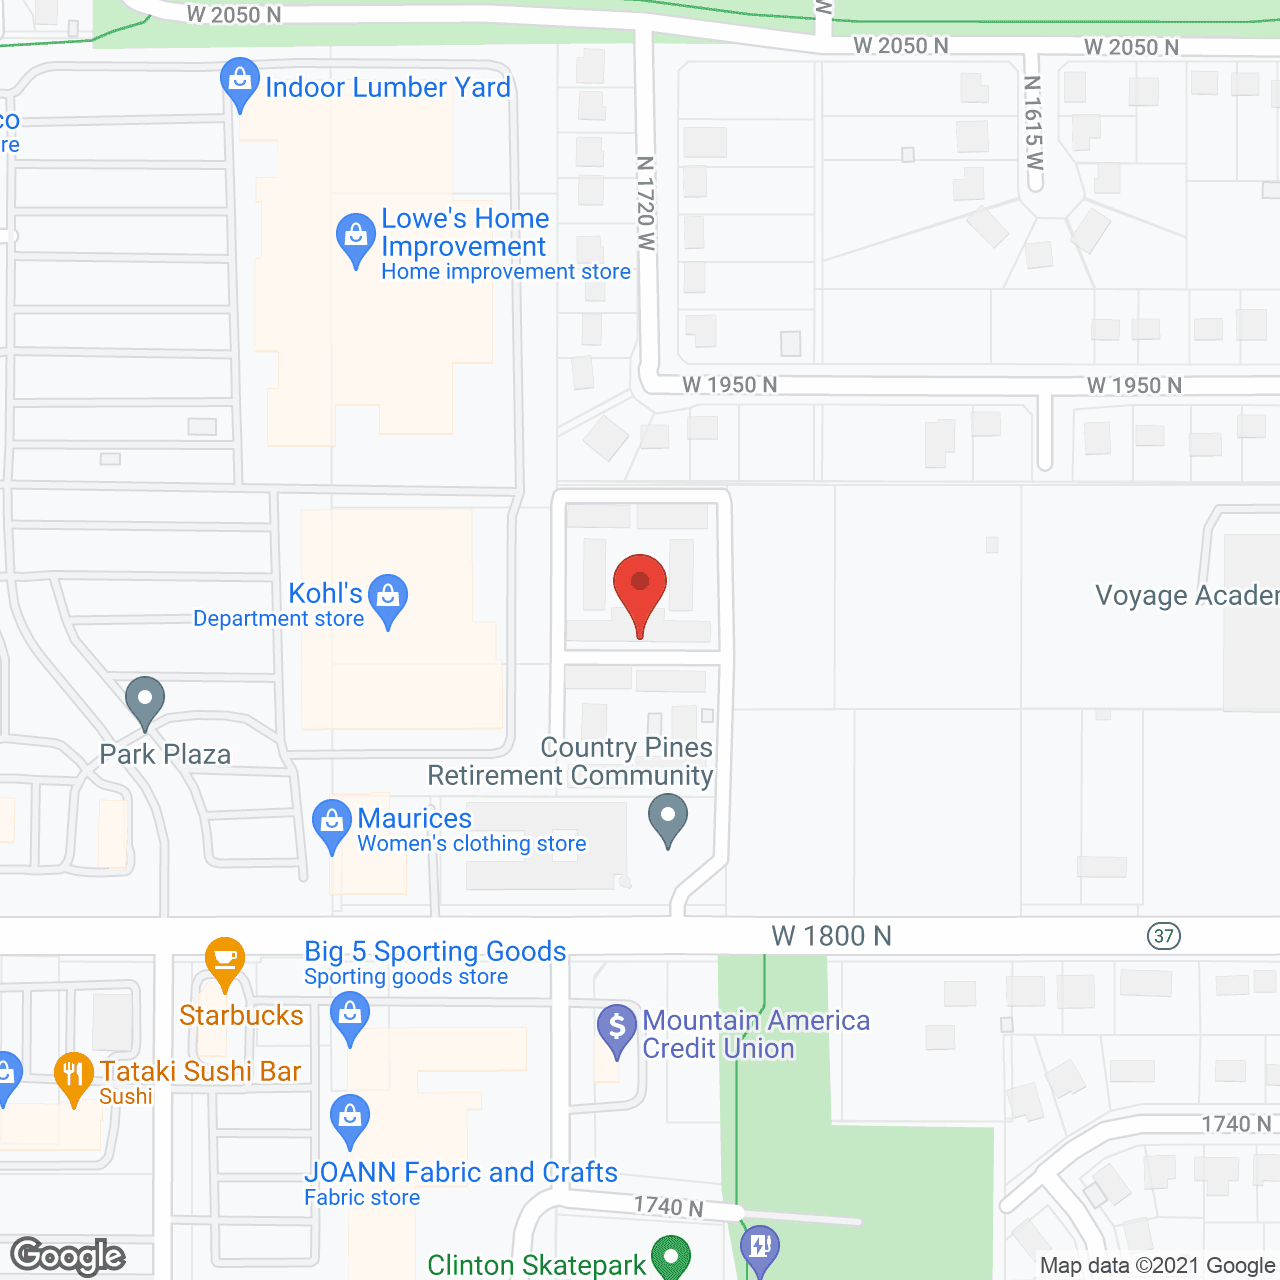 Country Pines Retirement Community in google map